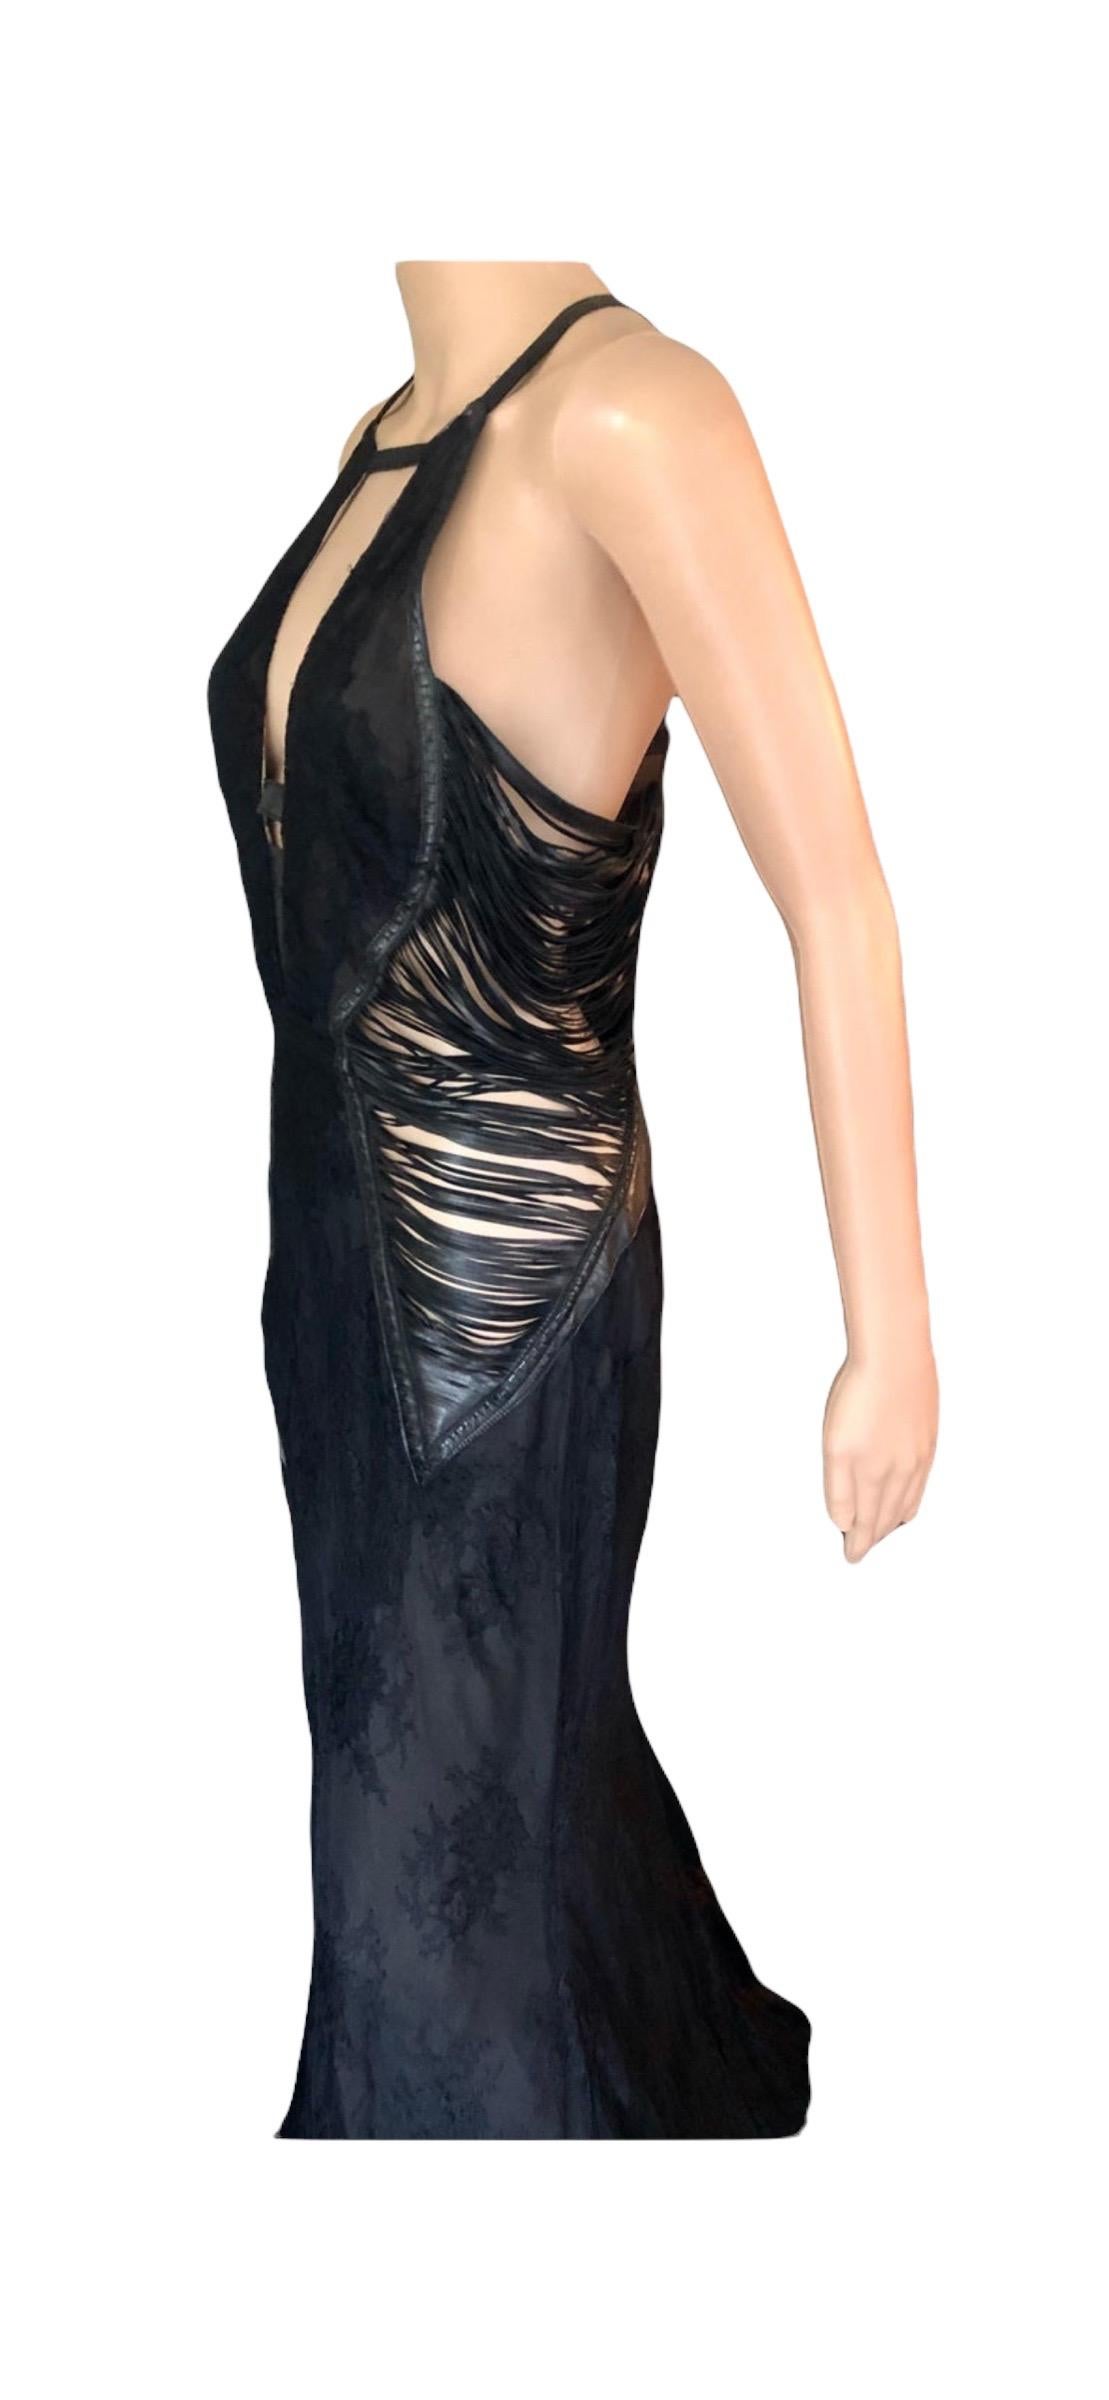 Roberto Cavalli S/S 2013 Leather Cutout Open Back Black Evening Dress Gown For Sale 10